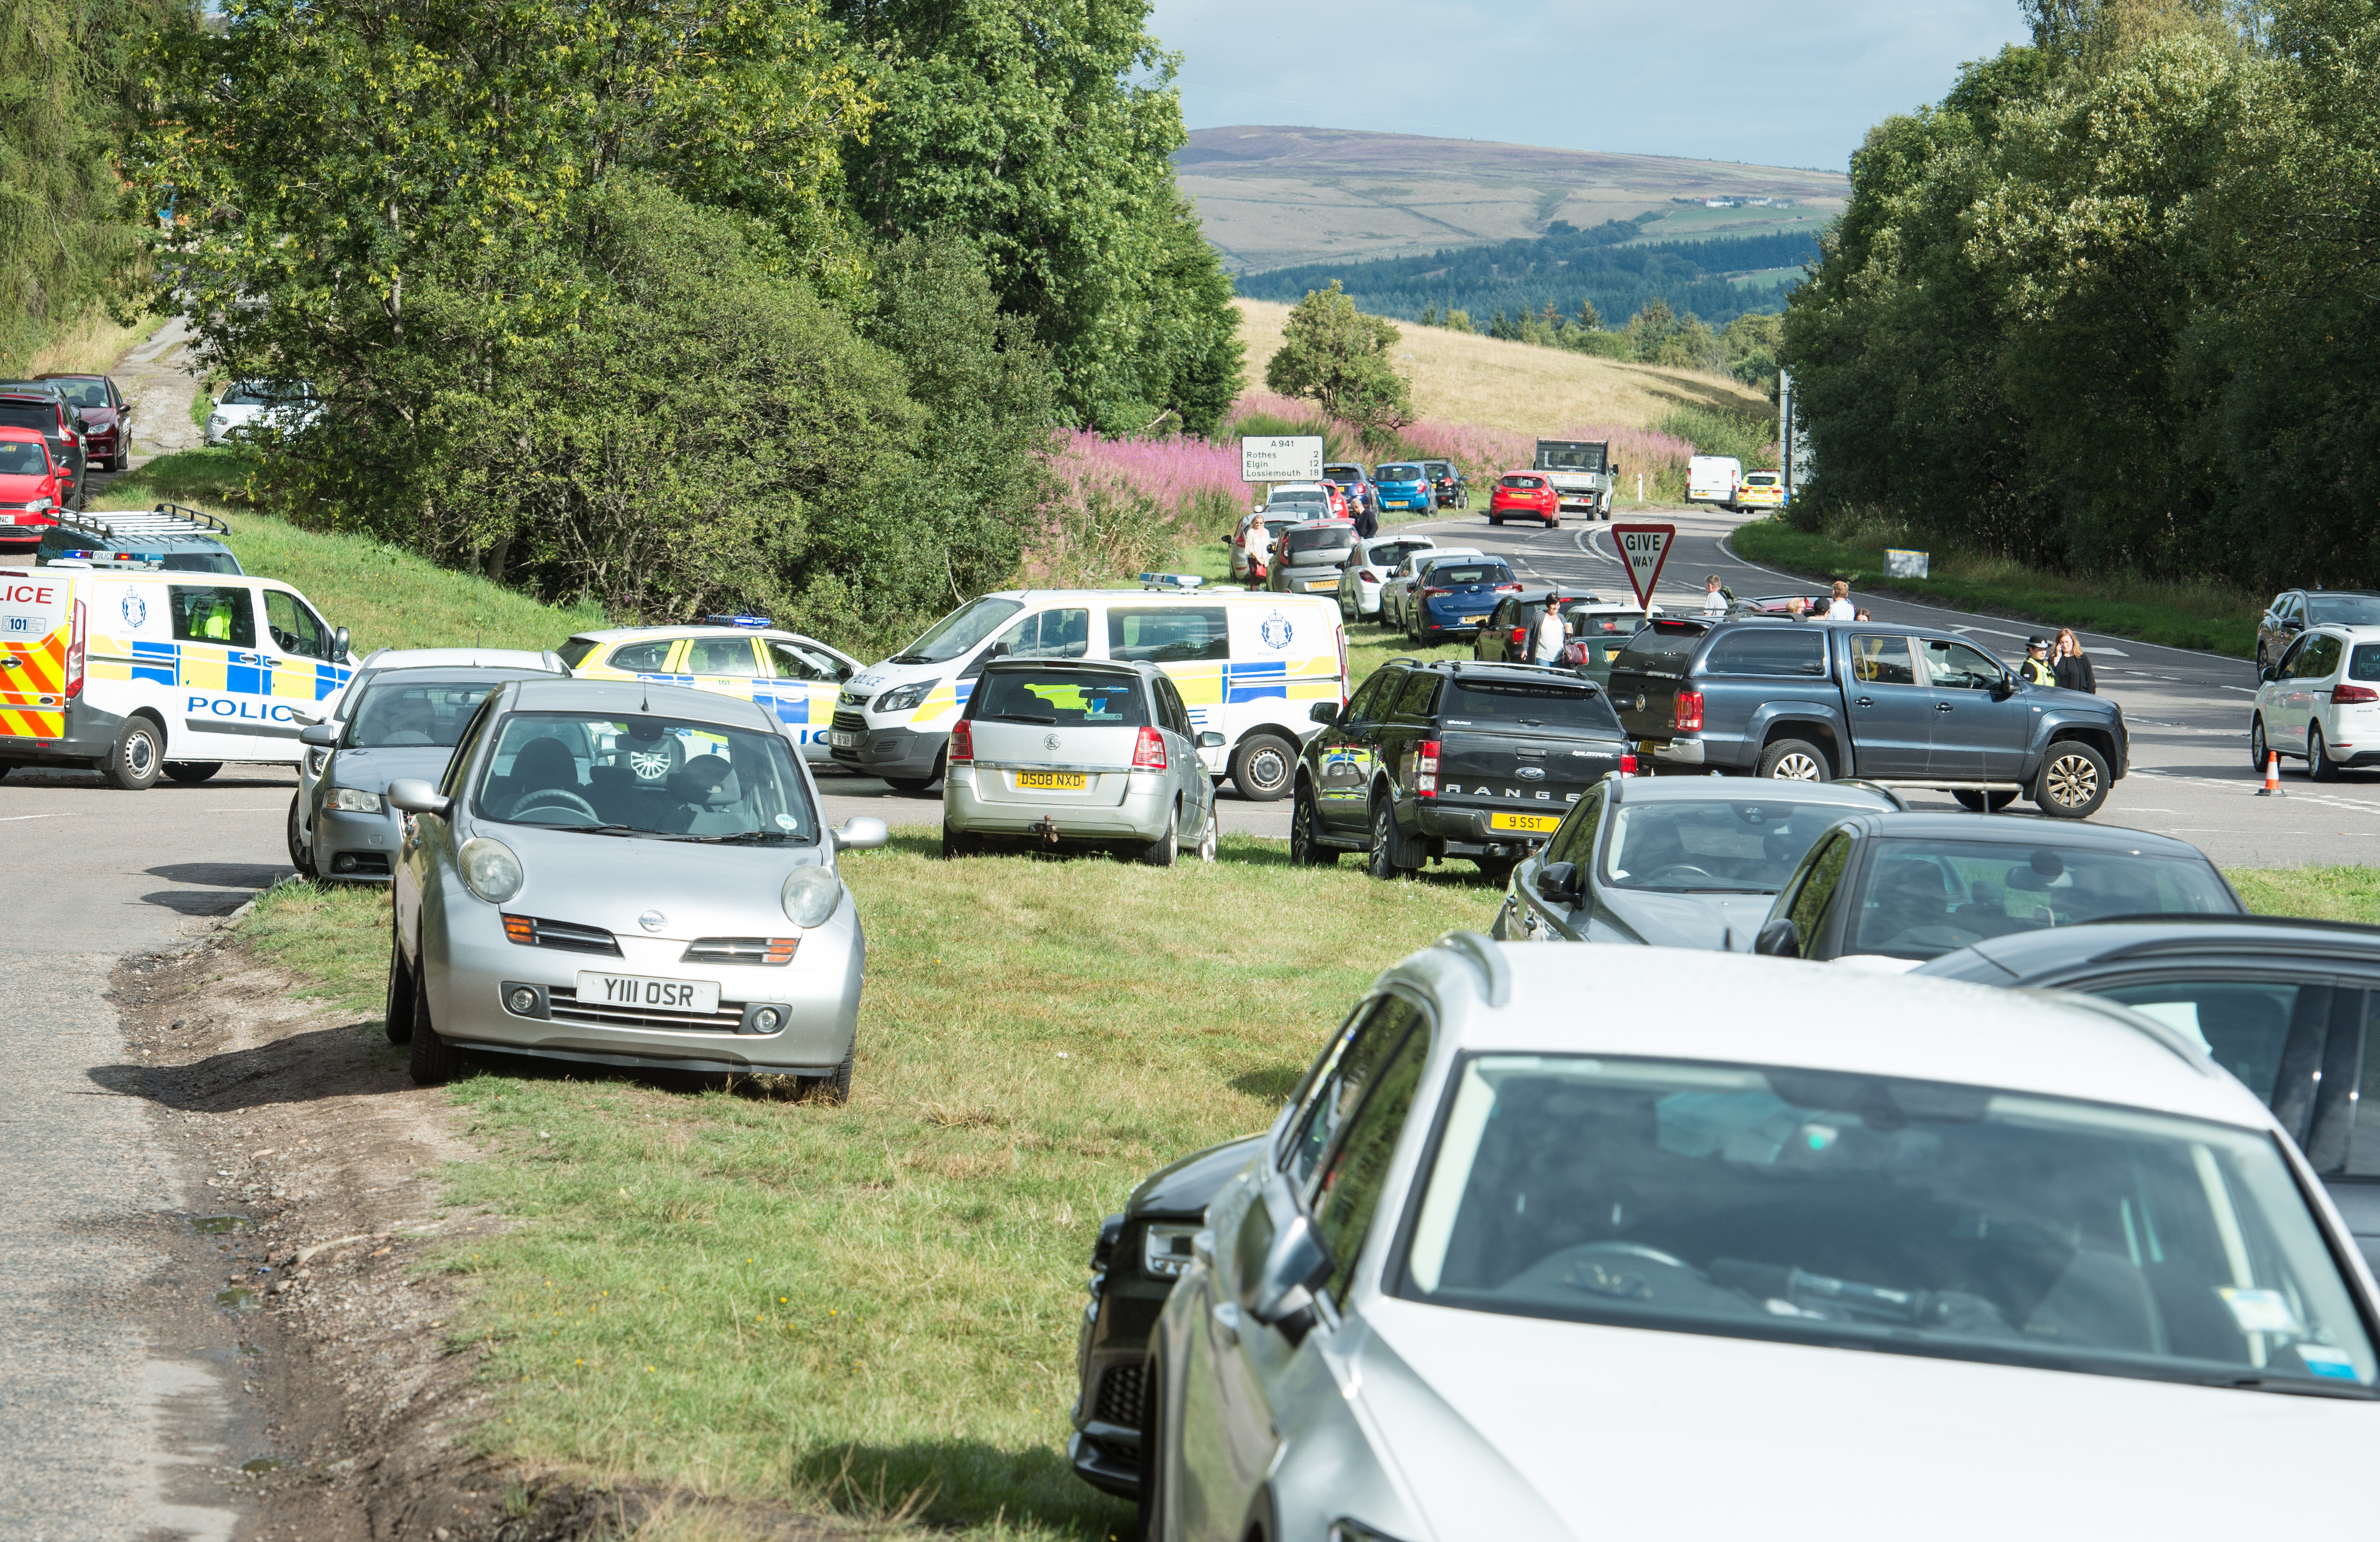 Cars park on the A941 Elgin road near Craigellachie in an attempt to reach the Macallan distillery.